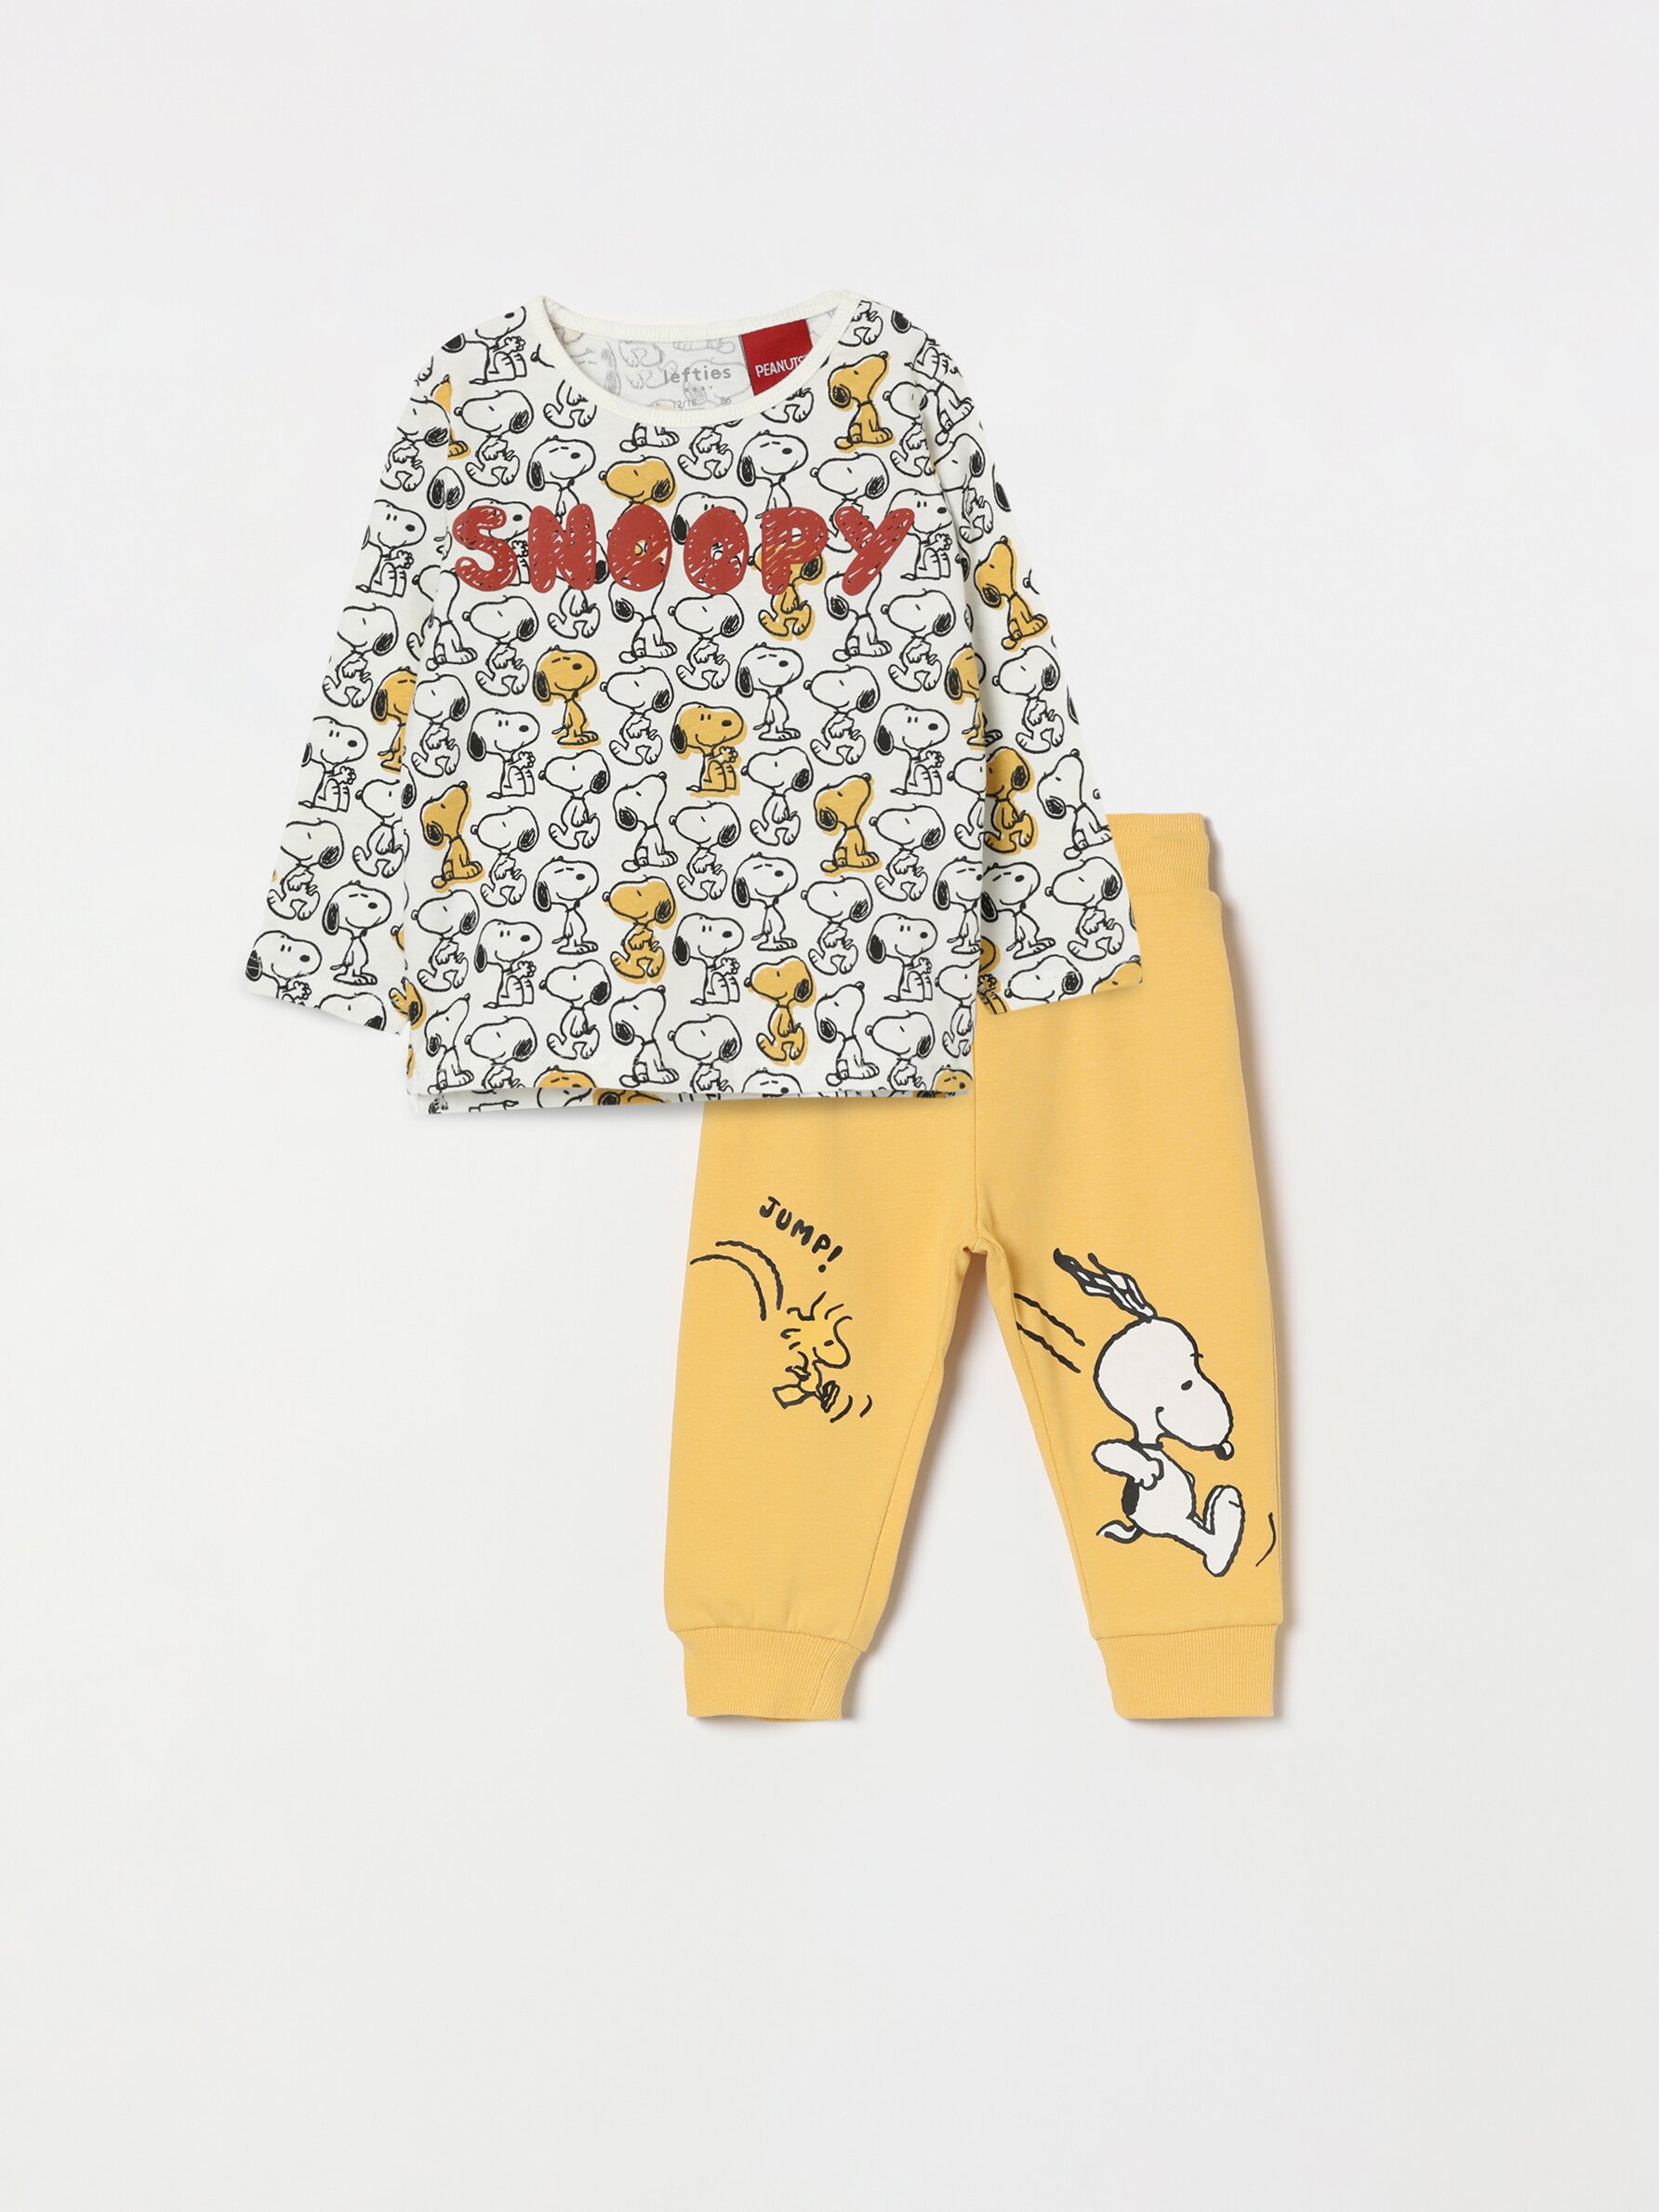 PEANUTS SNOOPY BABY 2 PIECE SET SIZE 0/3 3/6 6/9 12 18 24 MONTHS NEW! 